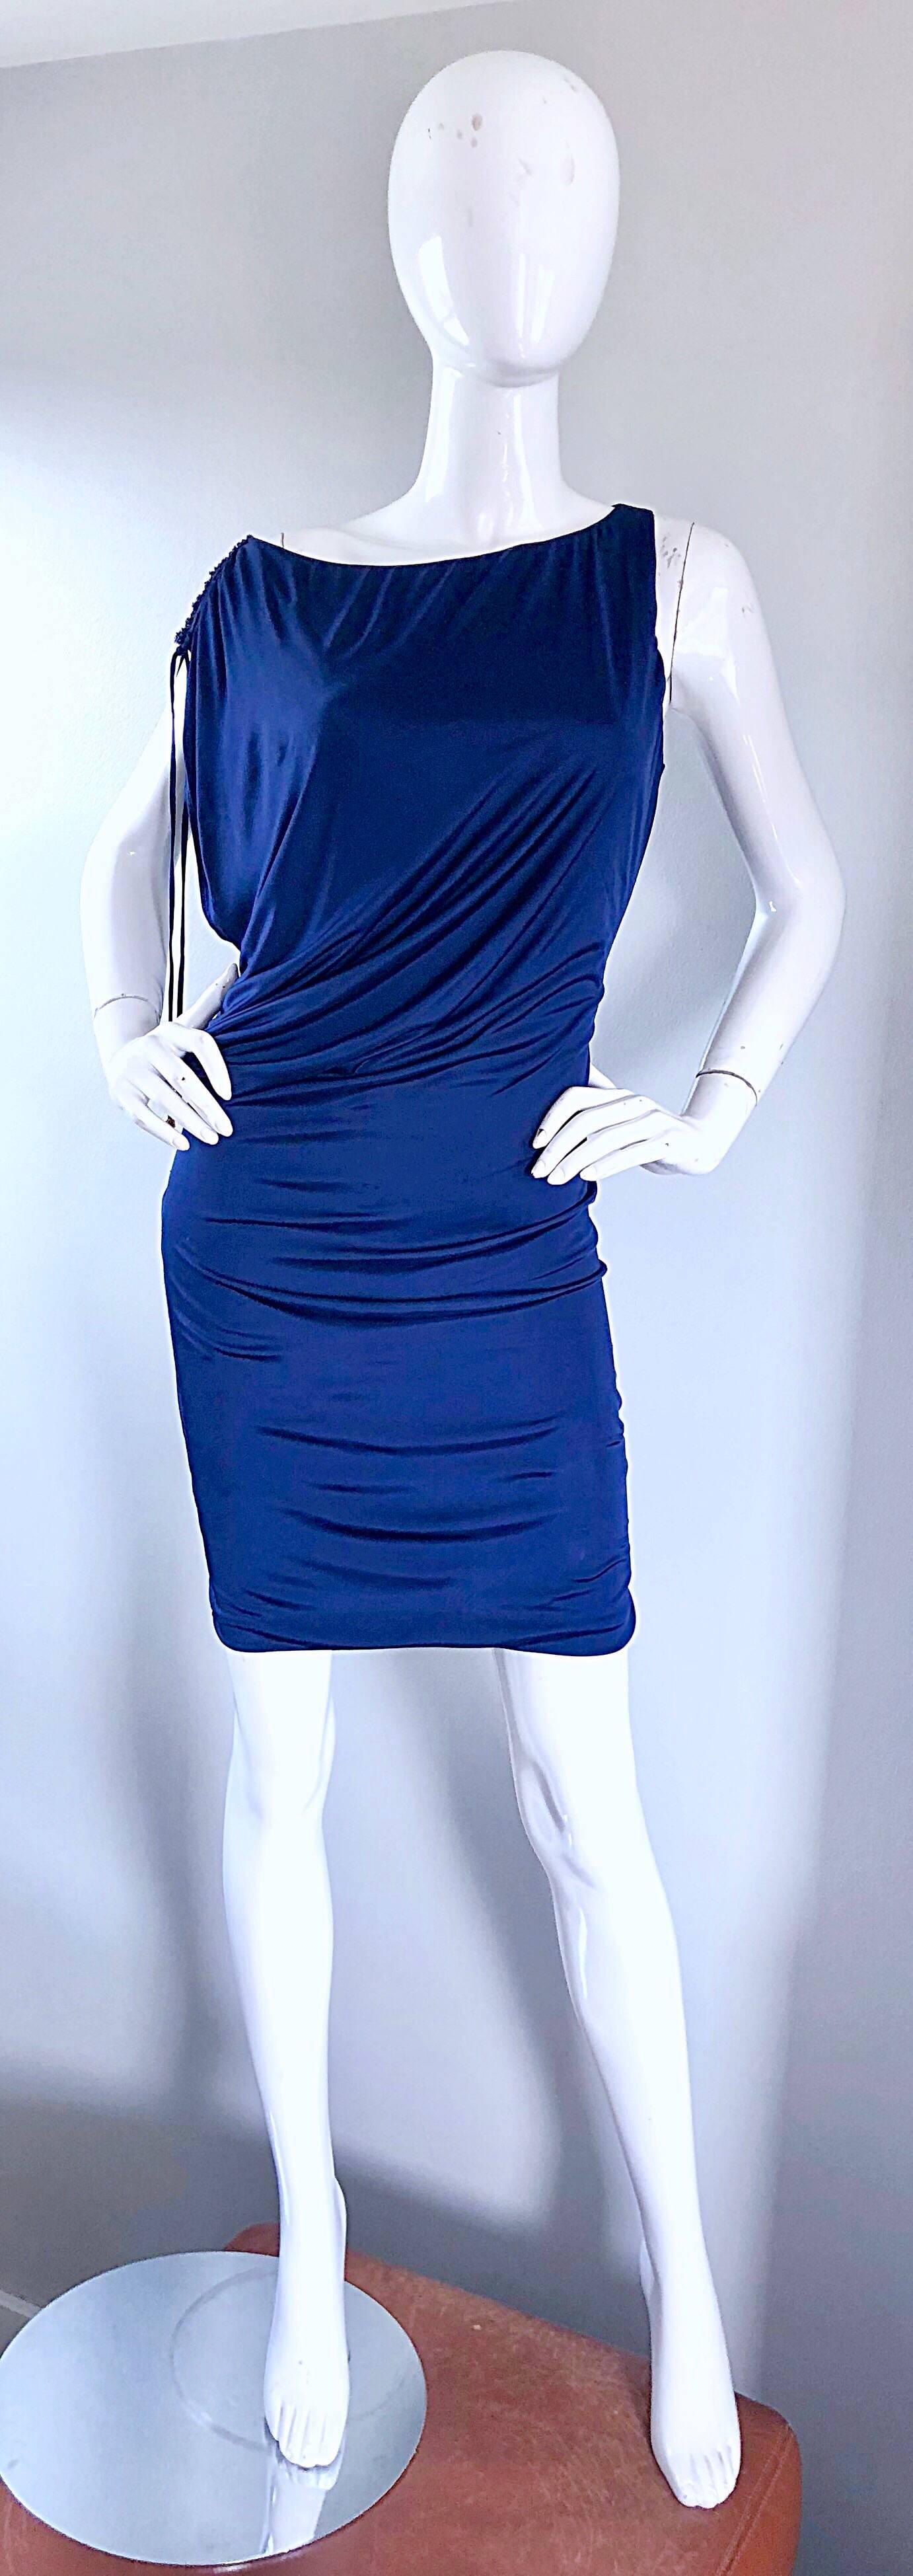 Sexy mid 1990s ROBERTO CAVALLI navy blue off-the-shoulder Grecian style silk jersey dress! Features a flattering stretch silk jersey, with gathers and drapes that stretch to fit. Beading and tie detail at top left shoulder (ties can be tied in a